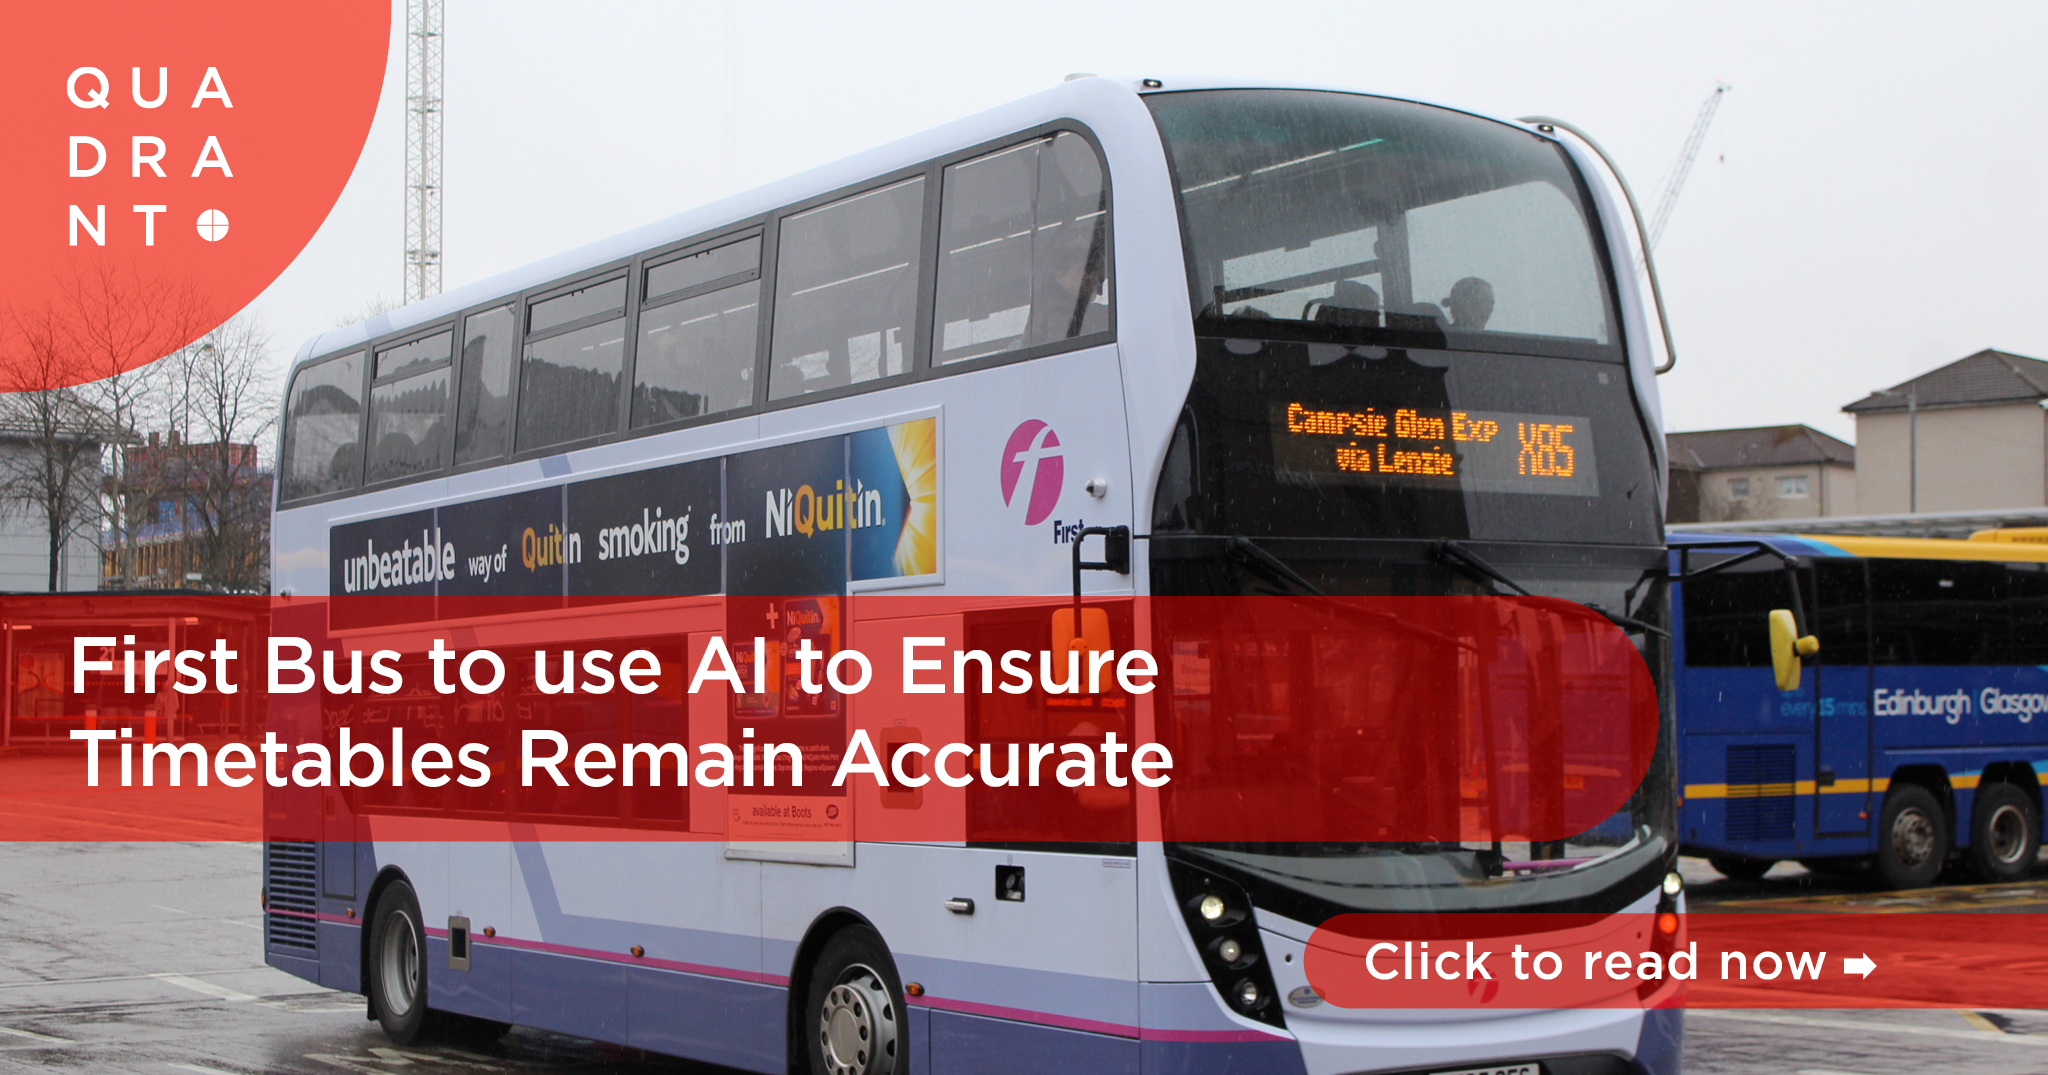 First Bus to use AI to Ensure Timetables Remain Accurate